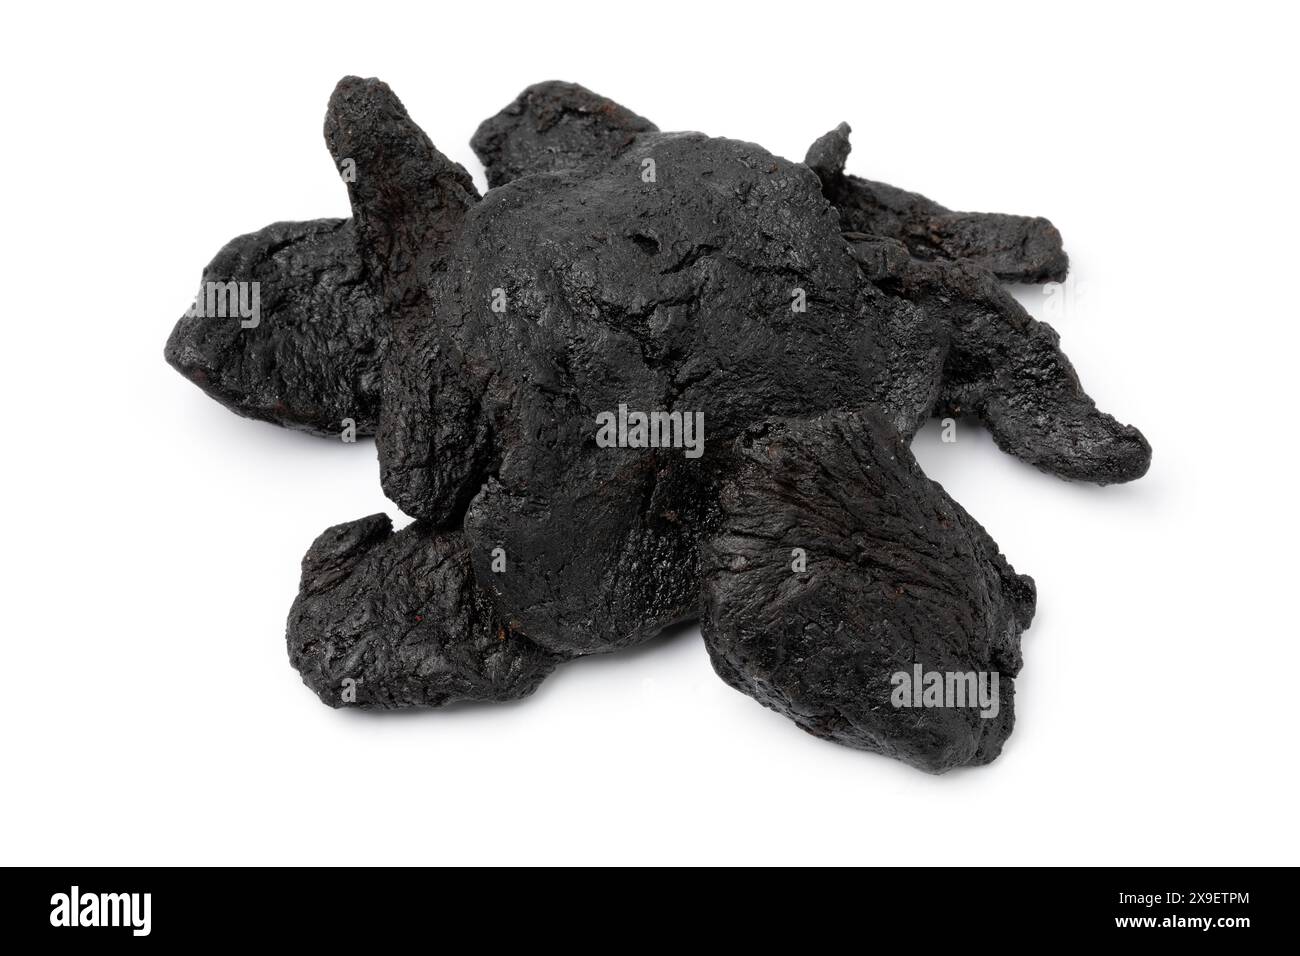 Heap of black Rehmannia glutinosa root close up isolated on white background Stock Photo